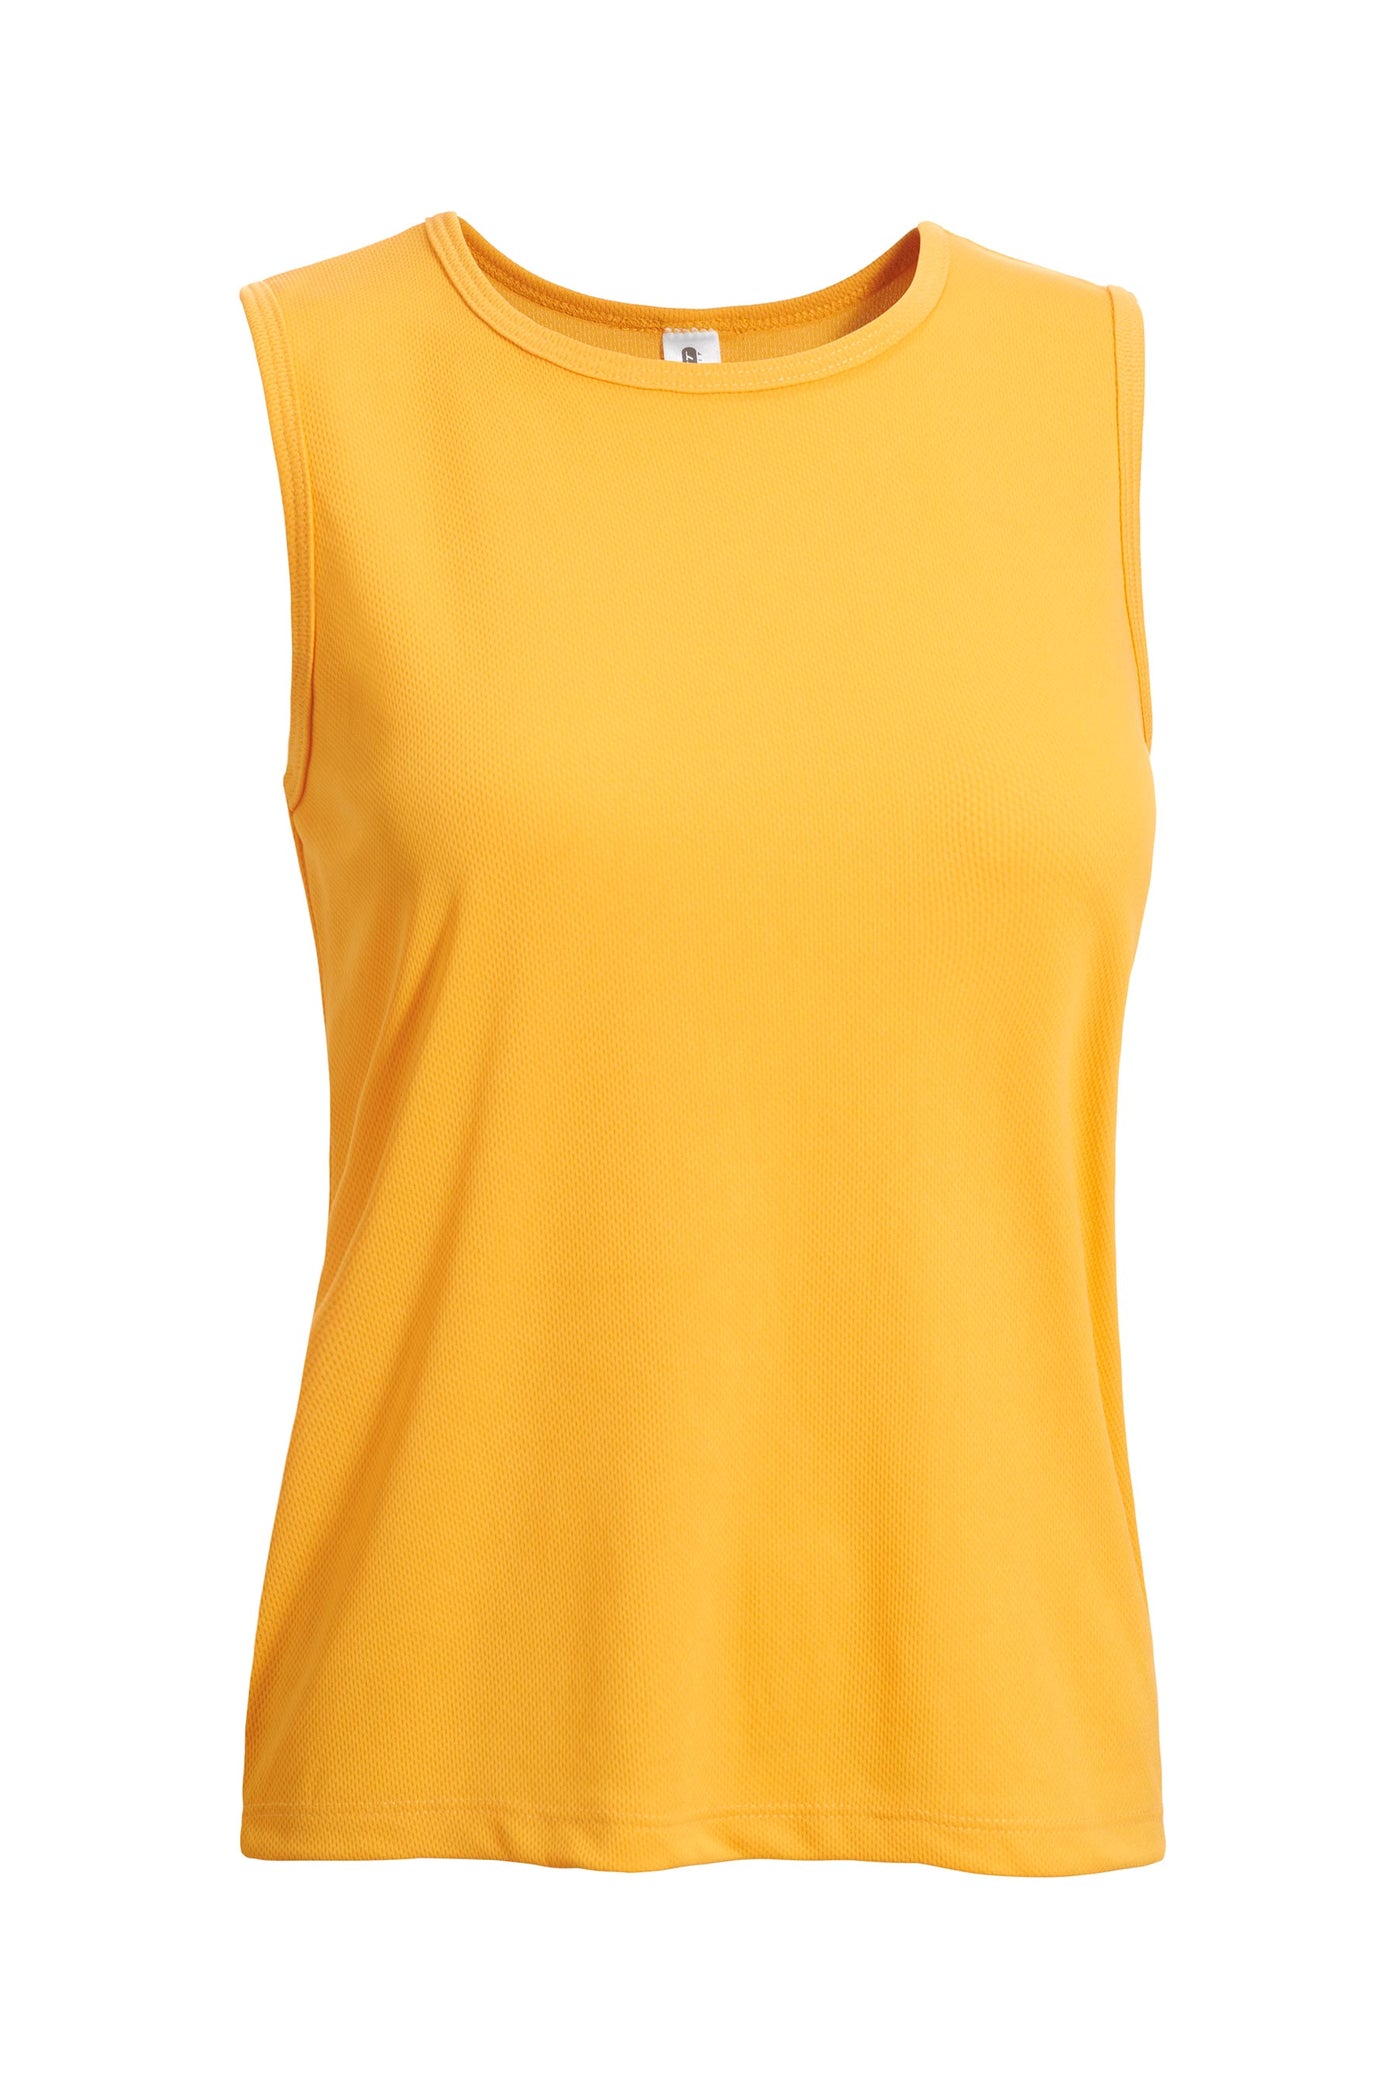 Expert Brand Retail Women's Oxymesh™ Sleeveless Tank Royal Blue Made in USA gold#color_gold